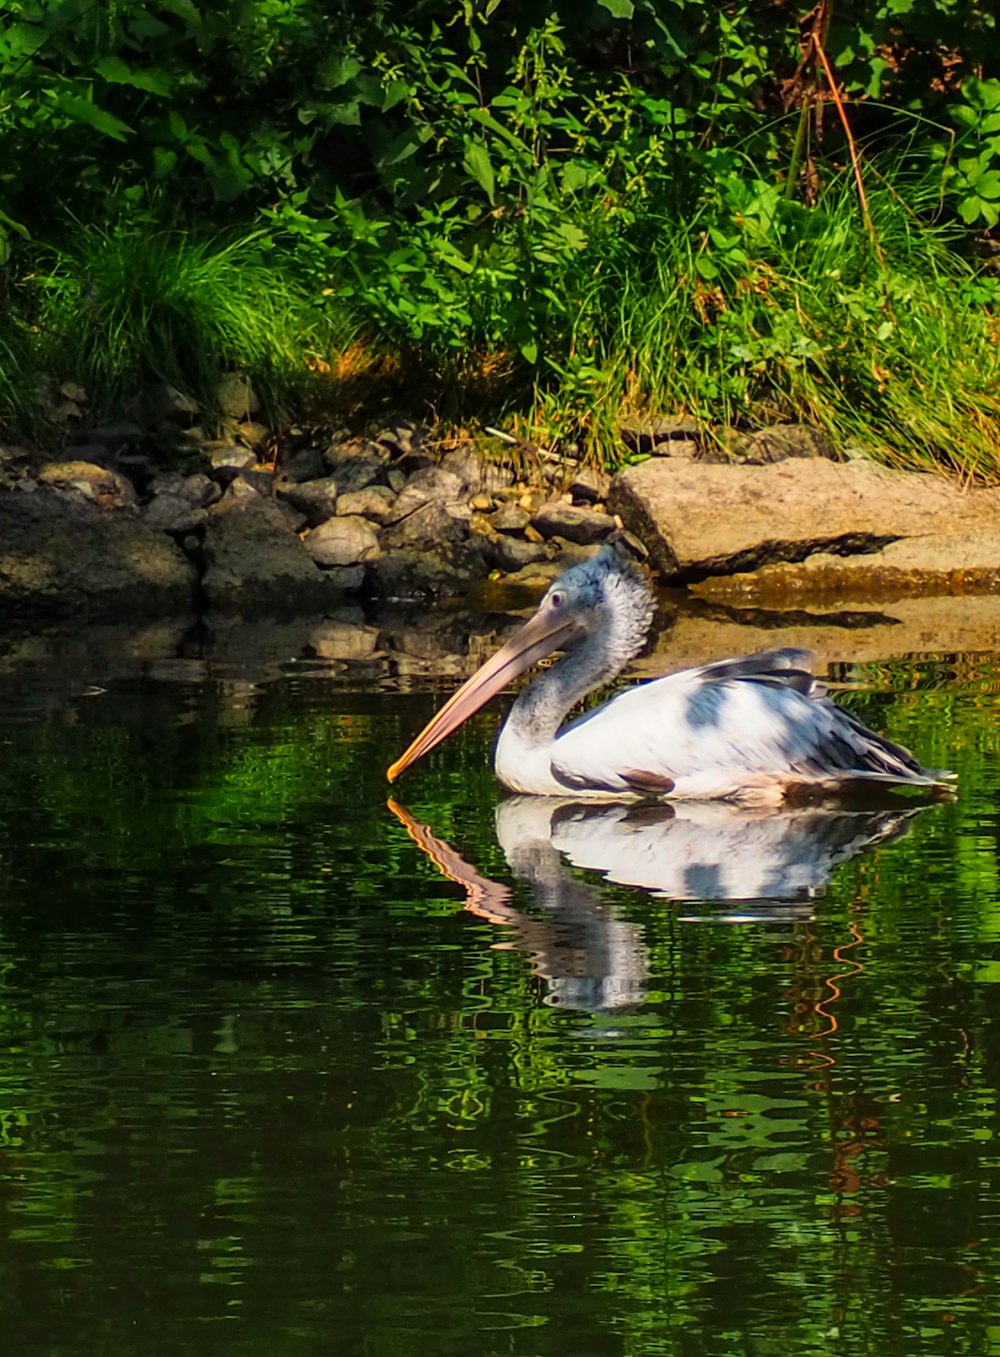 a pelican is swimming in the water near the shore